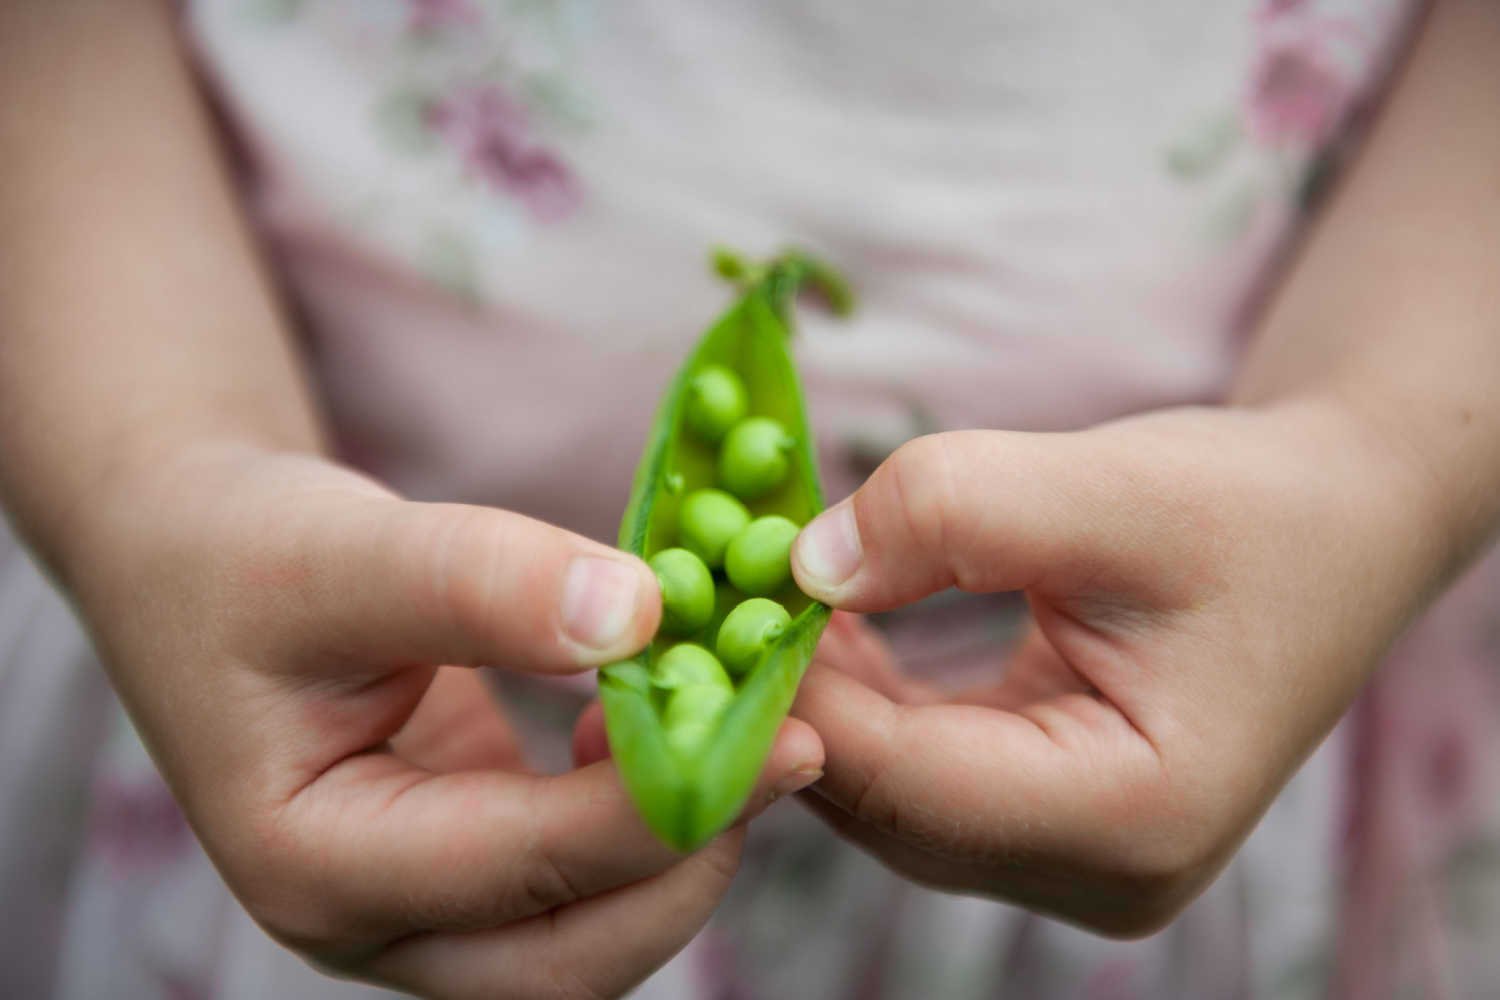 Benefits of Peas For Babies